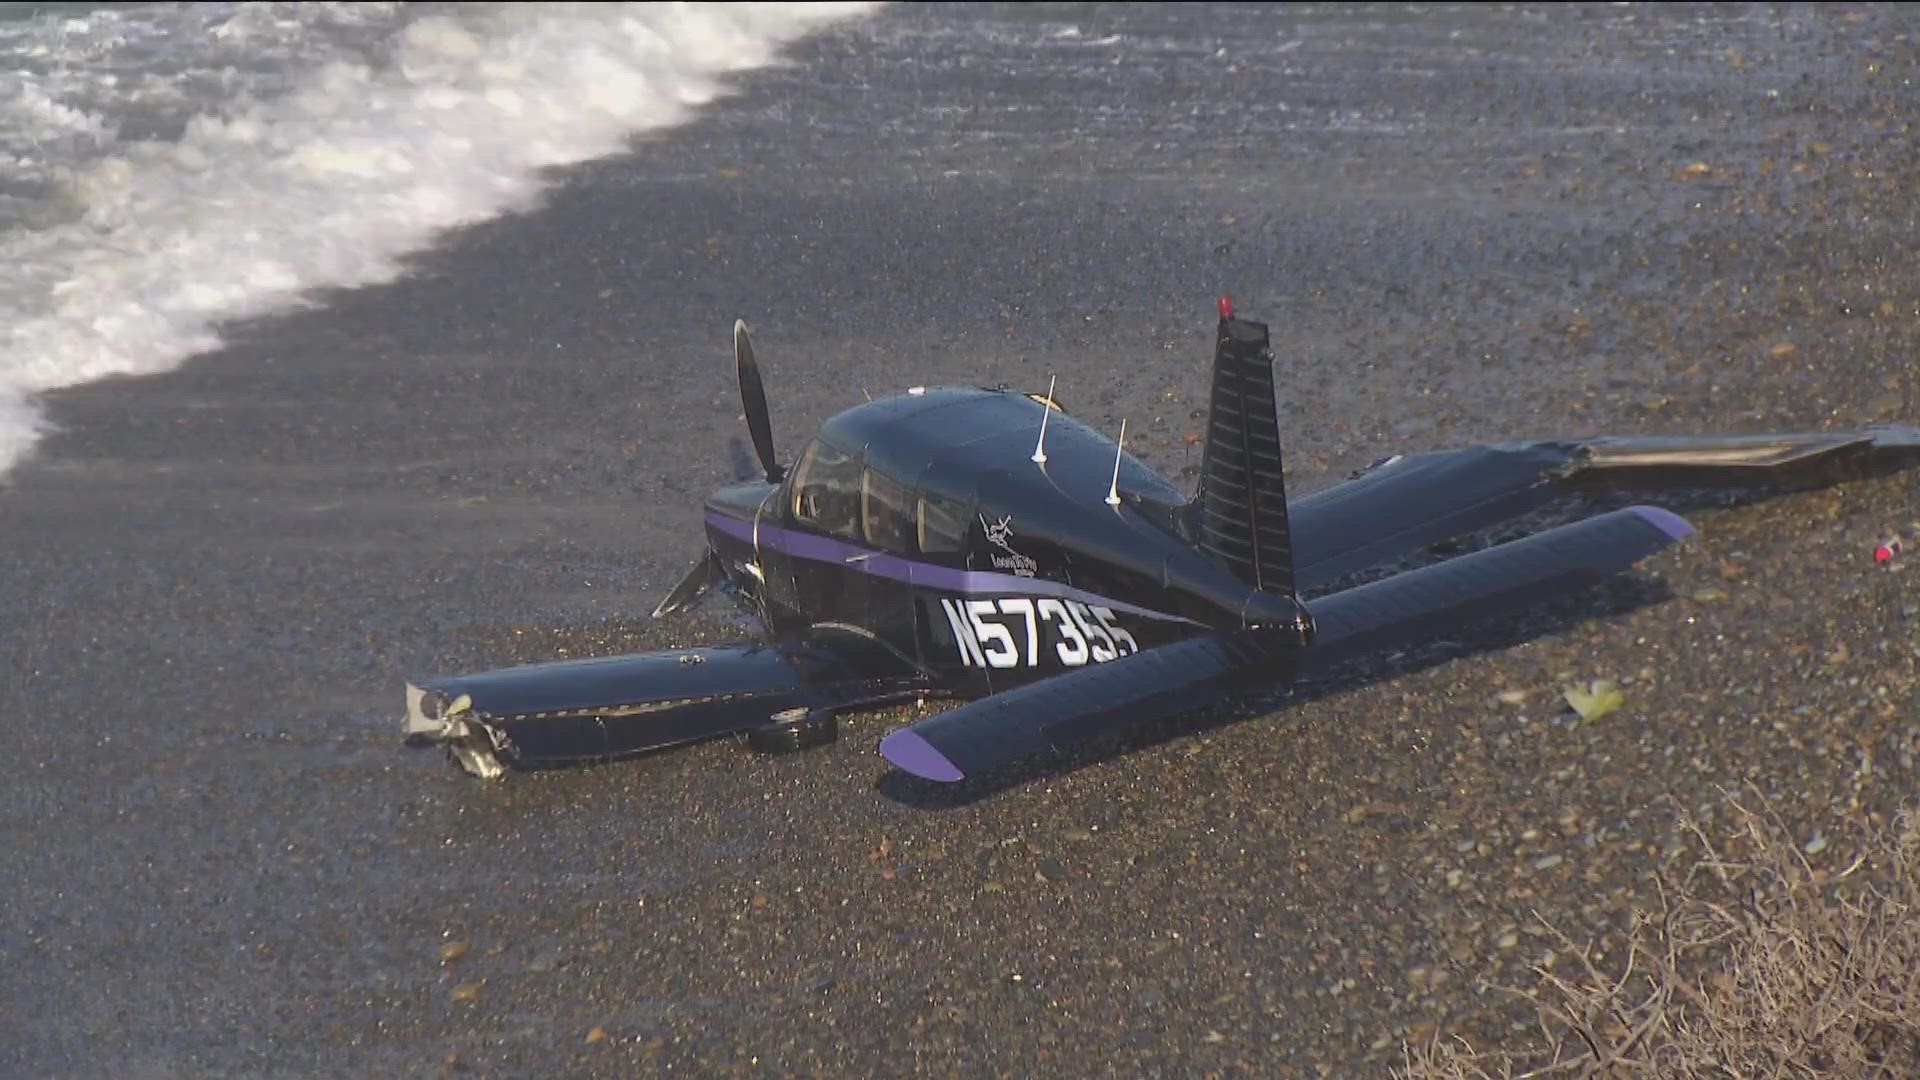 The aircraft took off from Montgomery Field and ended up in the water 30 yards off shore.